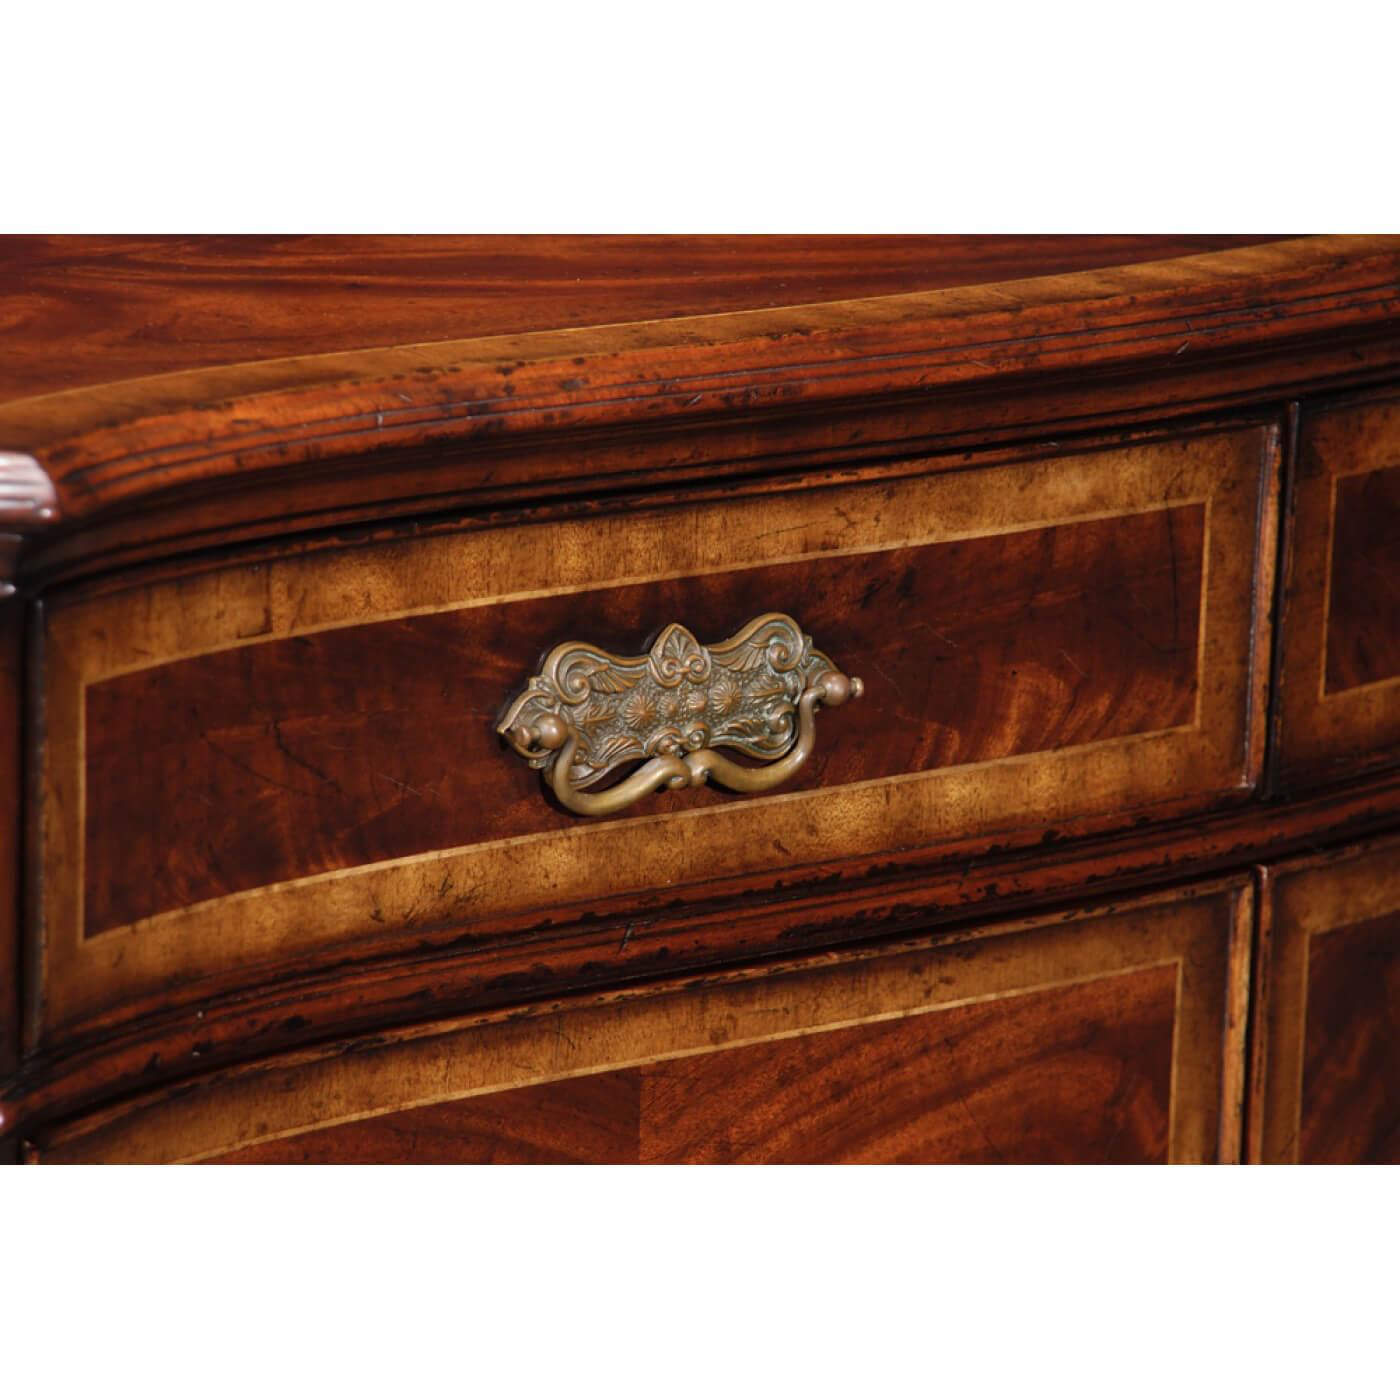 Crotch mahogany and crossbanded serpentine fronted side cabinet with canted corners of fluted columns with chip carving. Two shaped doors with drawers above, patinated brass handles and escutcheons, all raised on bracketed block feet.